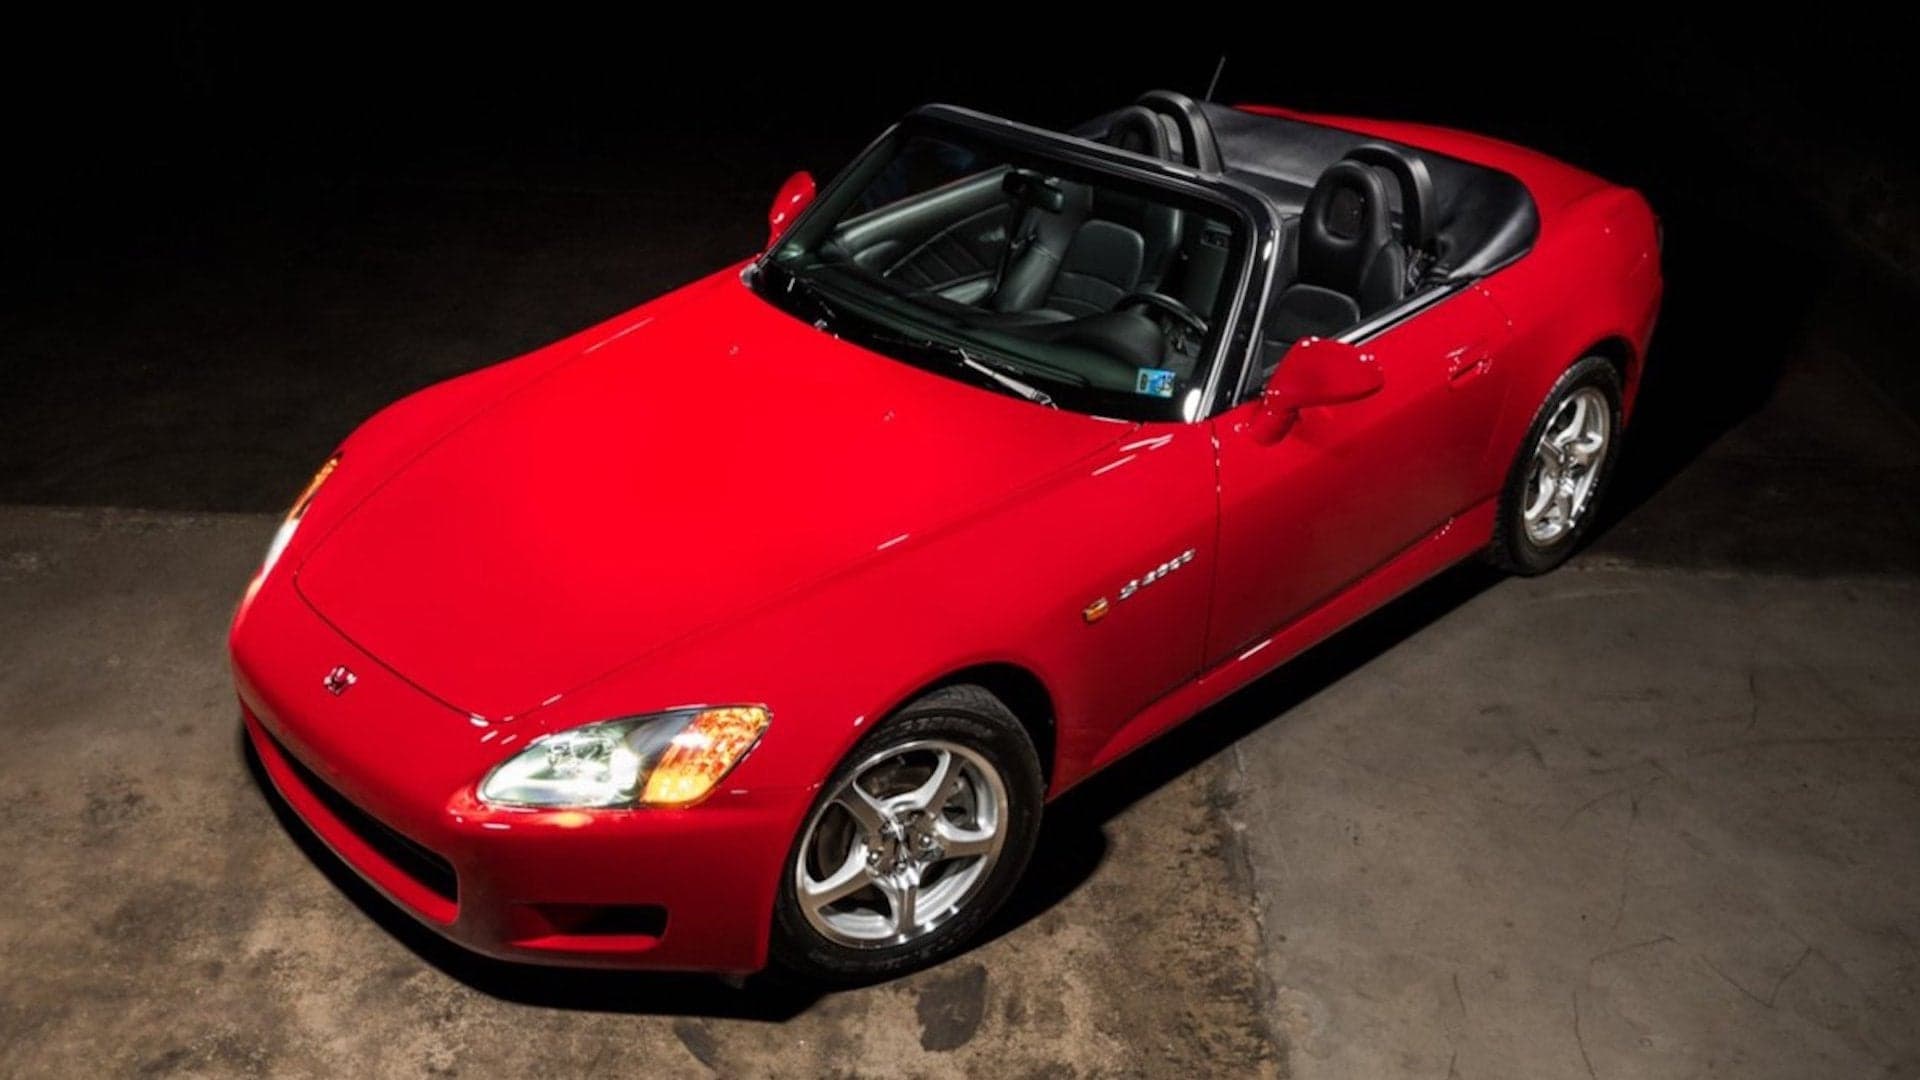 Honda S2000 With Only 1,001 Miles Purchased by IndyCar Driver for Staggering $48,000